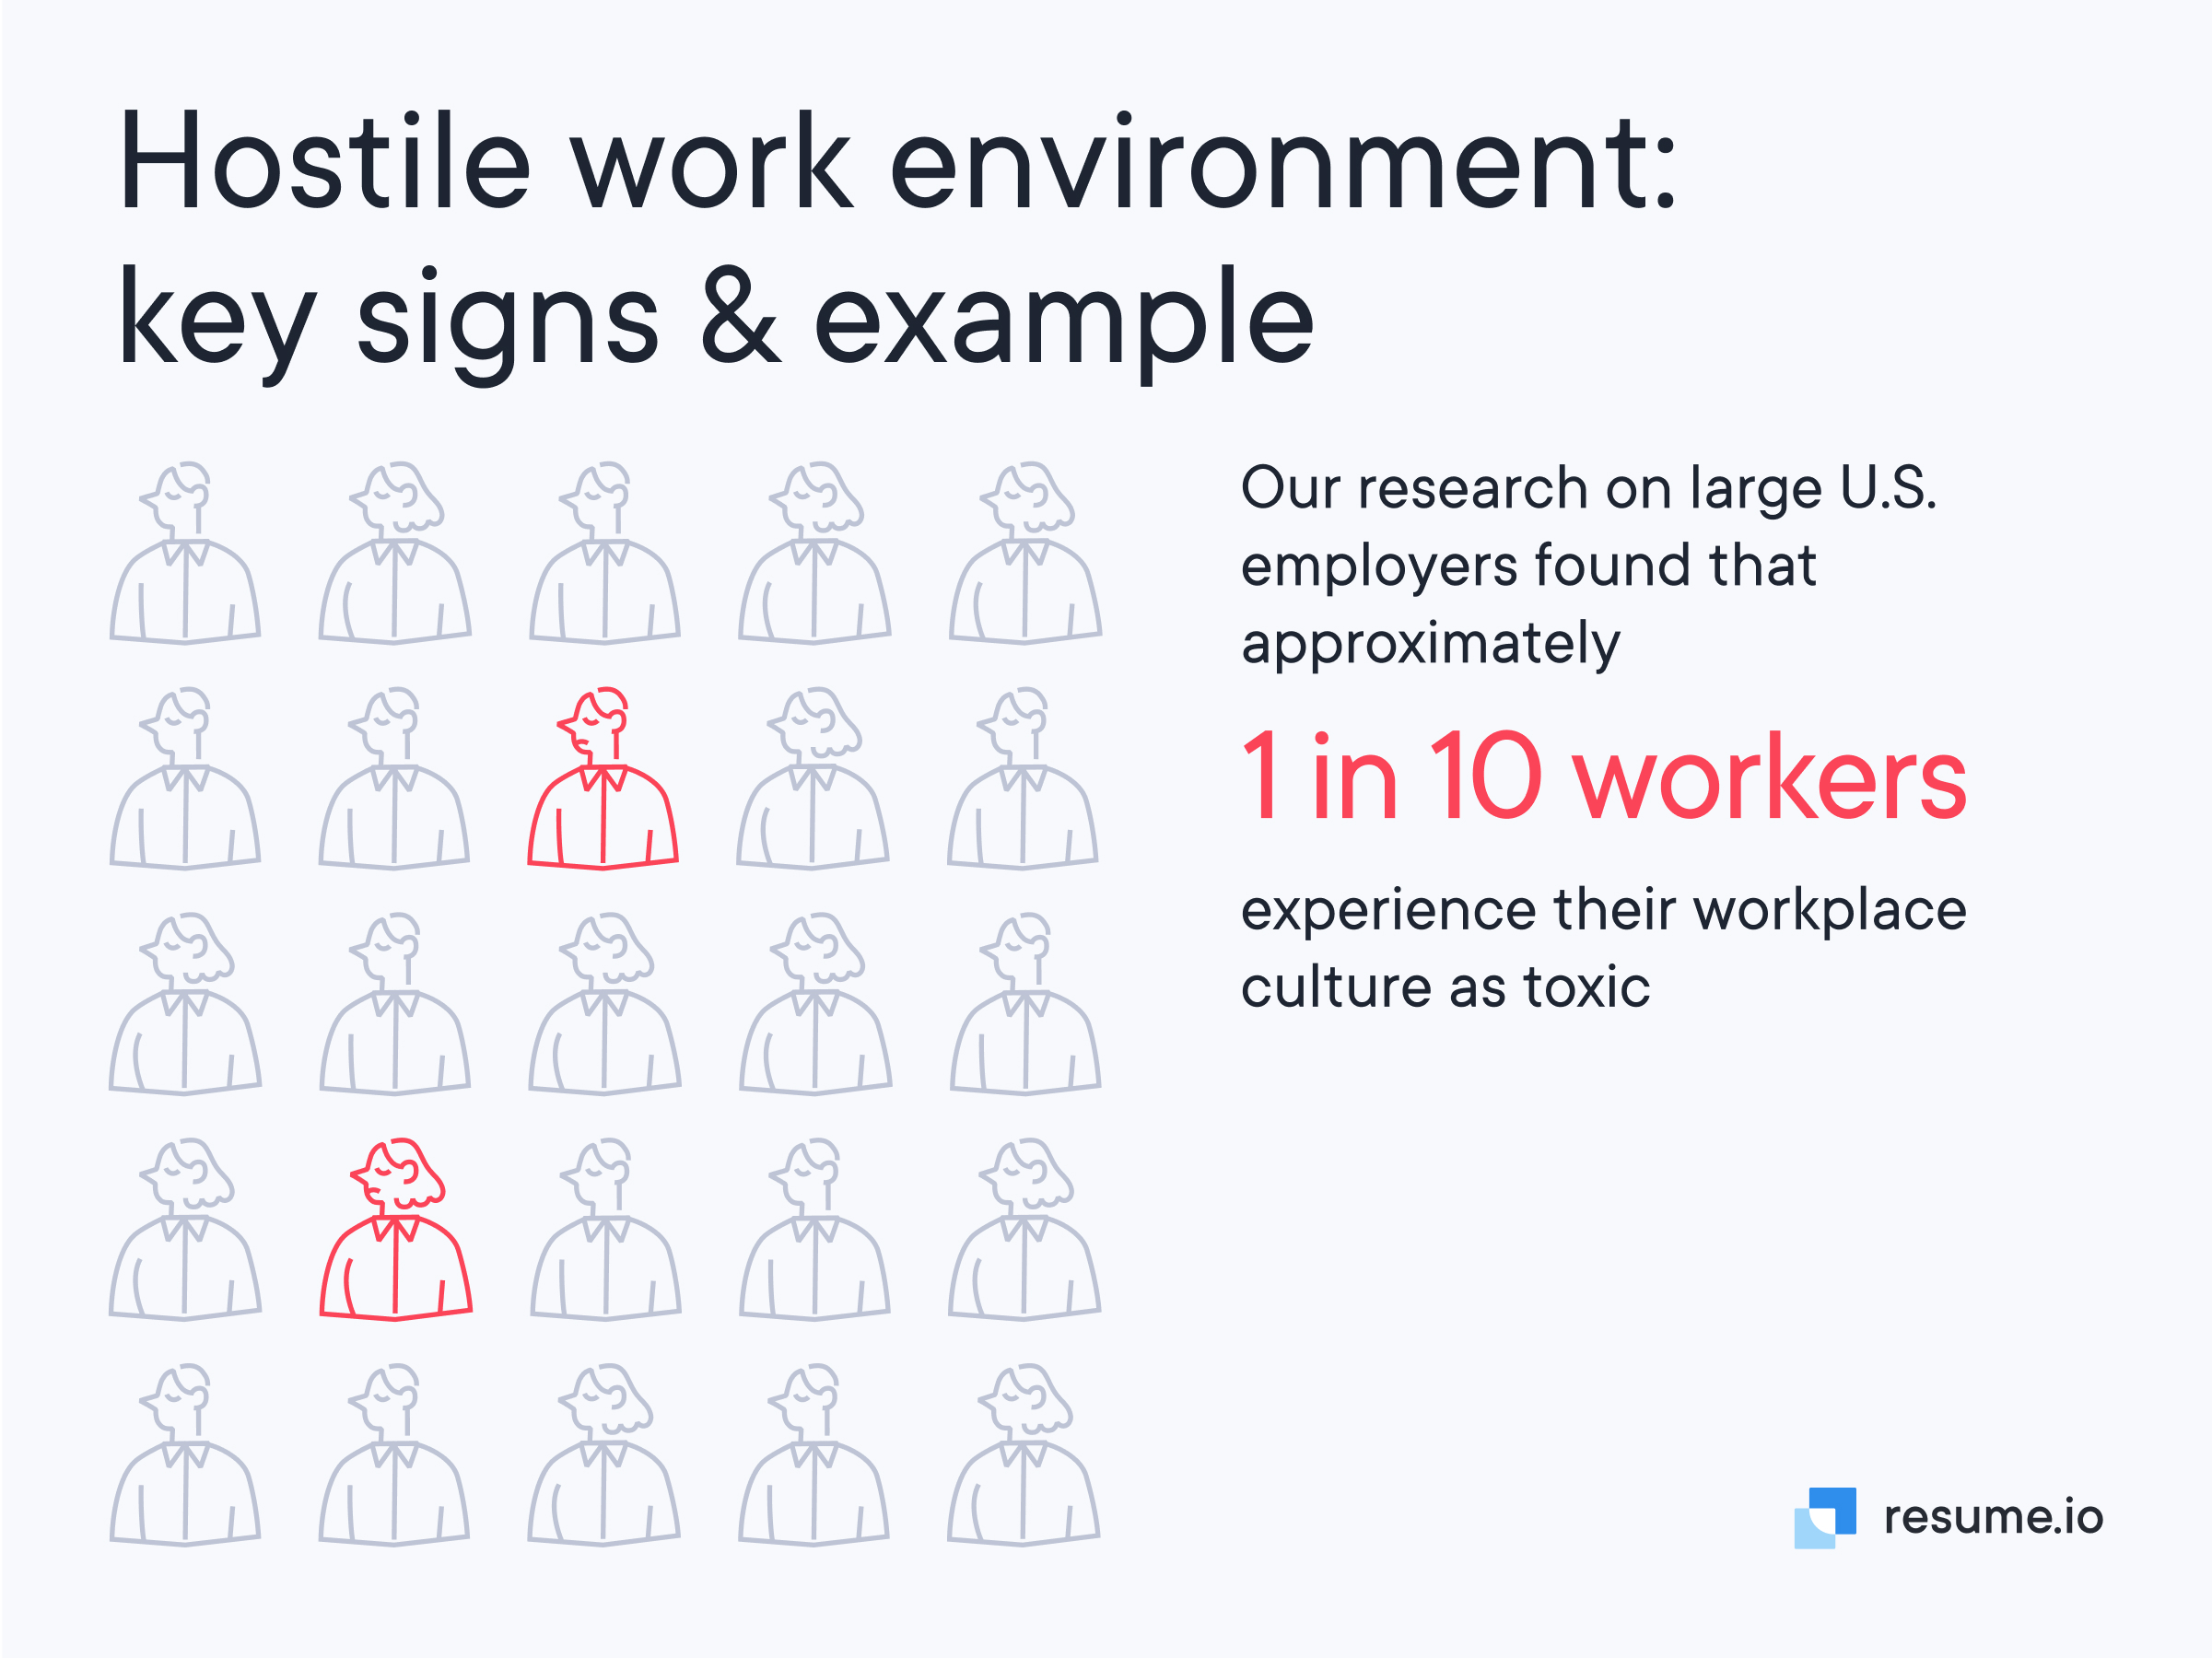 1 in 10 workers experience their workplace culture as toxic